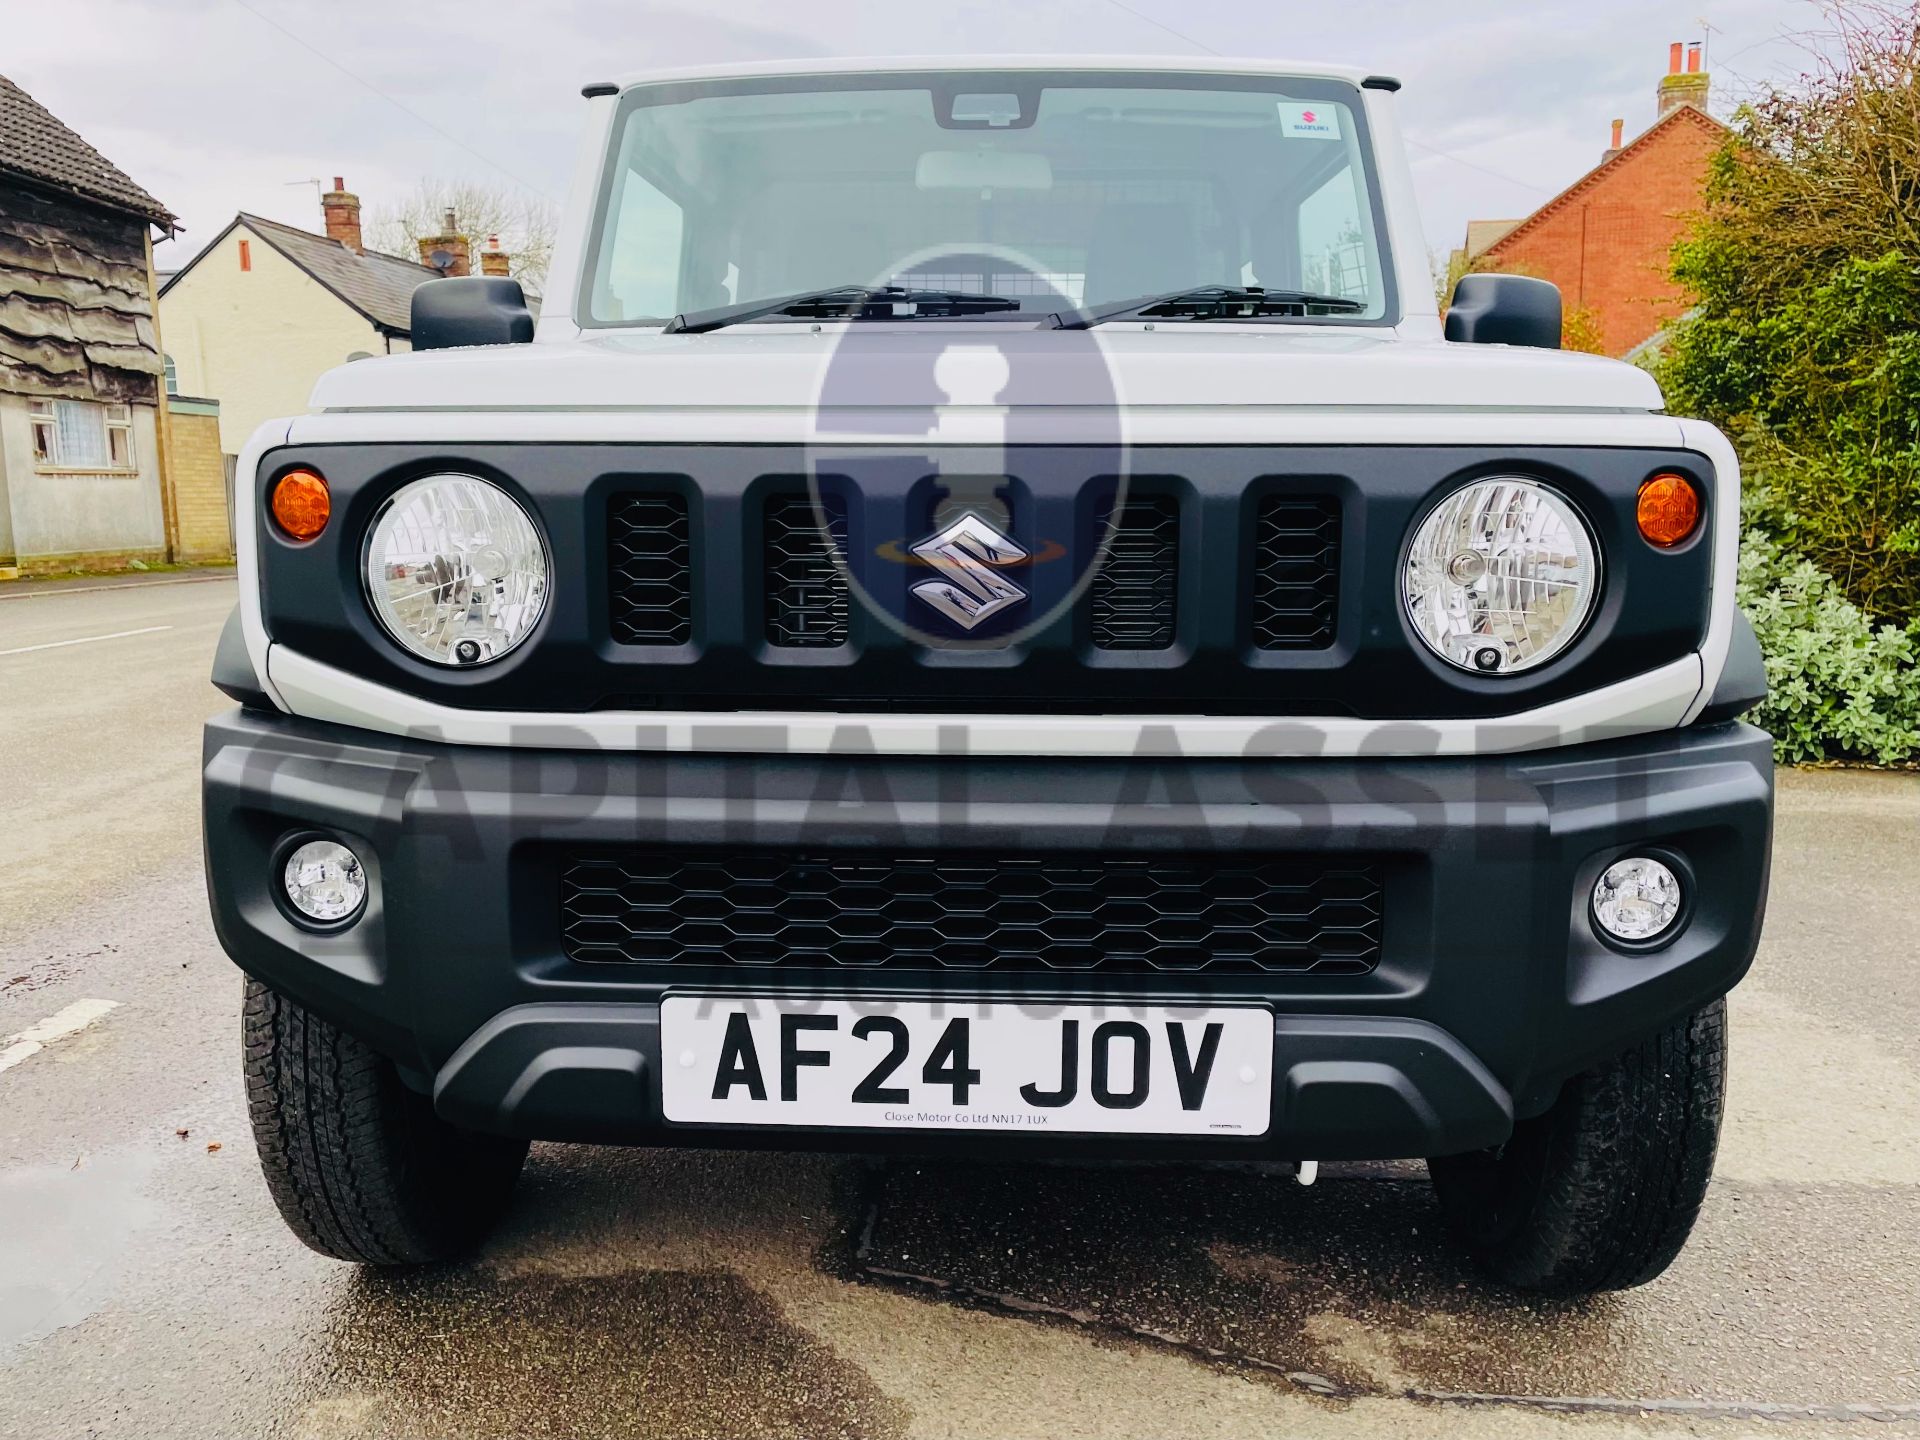 (ON SALE) SUZUKI JIMNY ALLGRIP (24 REG - BRAND NEW) DELIVERY MILEAGE ONLY - BEAT THE WAITING LIST - Image 3 of 24